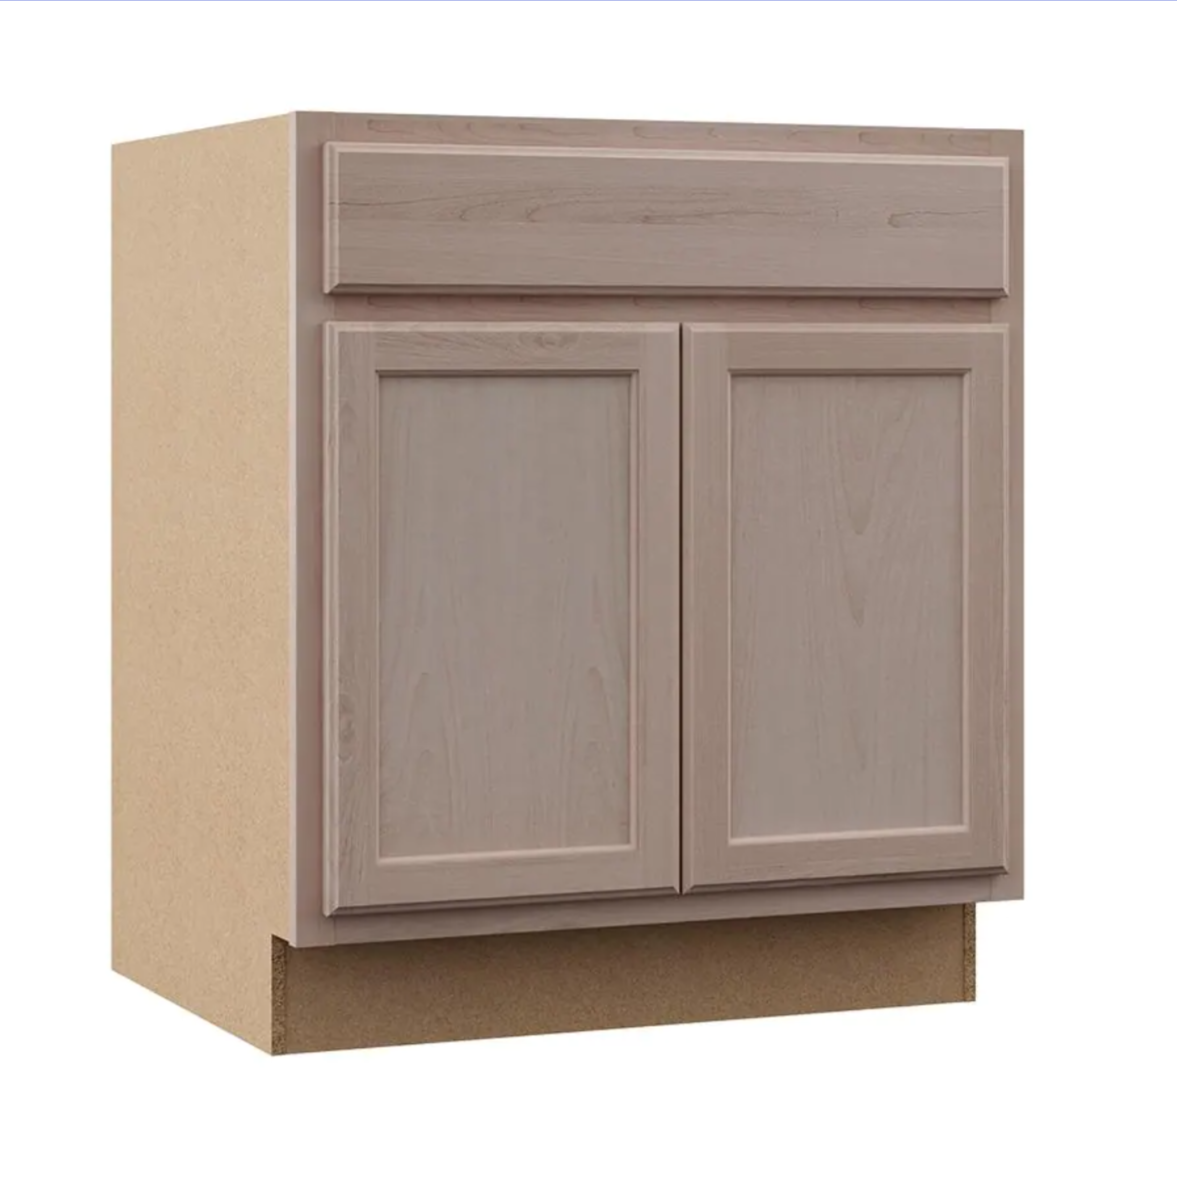 30 in. W x 24 in. D x 34.5 in. H Assembled Base Kitchen Cabinet in Unfinished with Recessed Panel